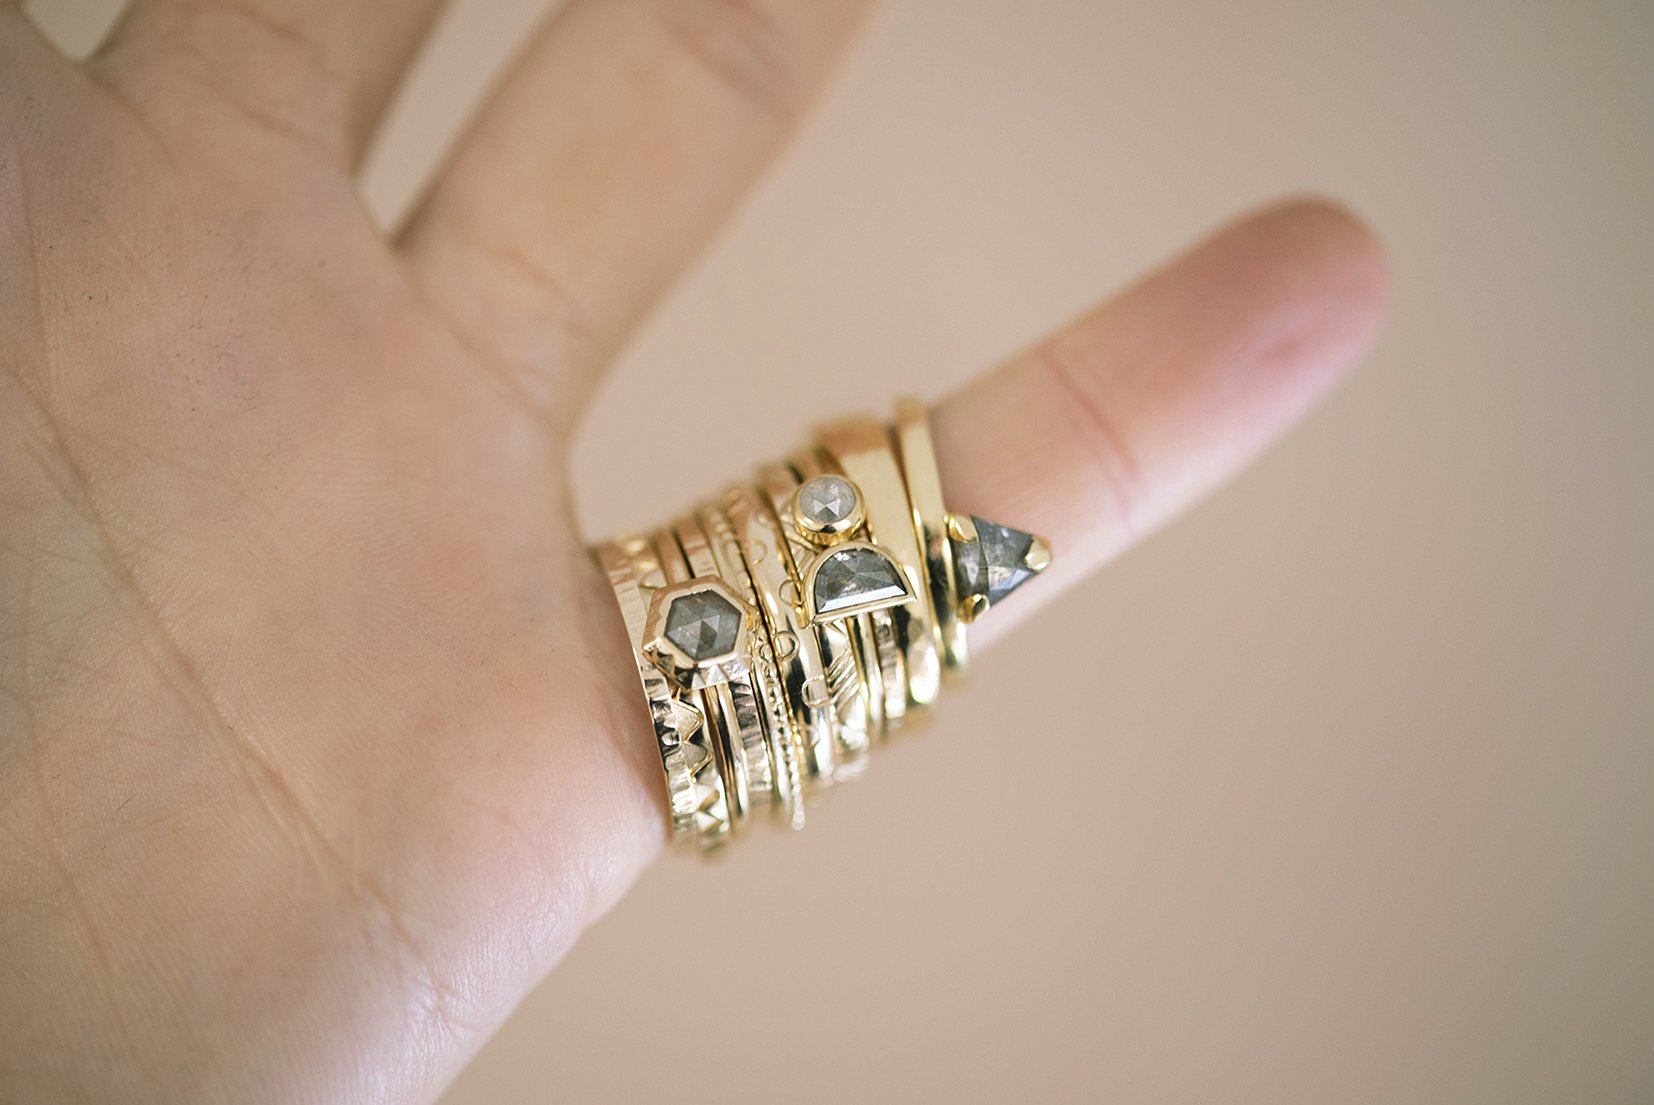  Multiple wedding rings stacked and displayed on one finger. The modern gold rings are a mixture of widths and textures, some set with stones and some without. 